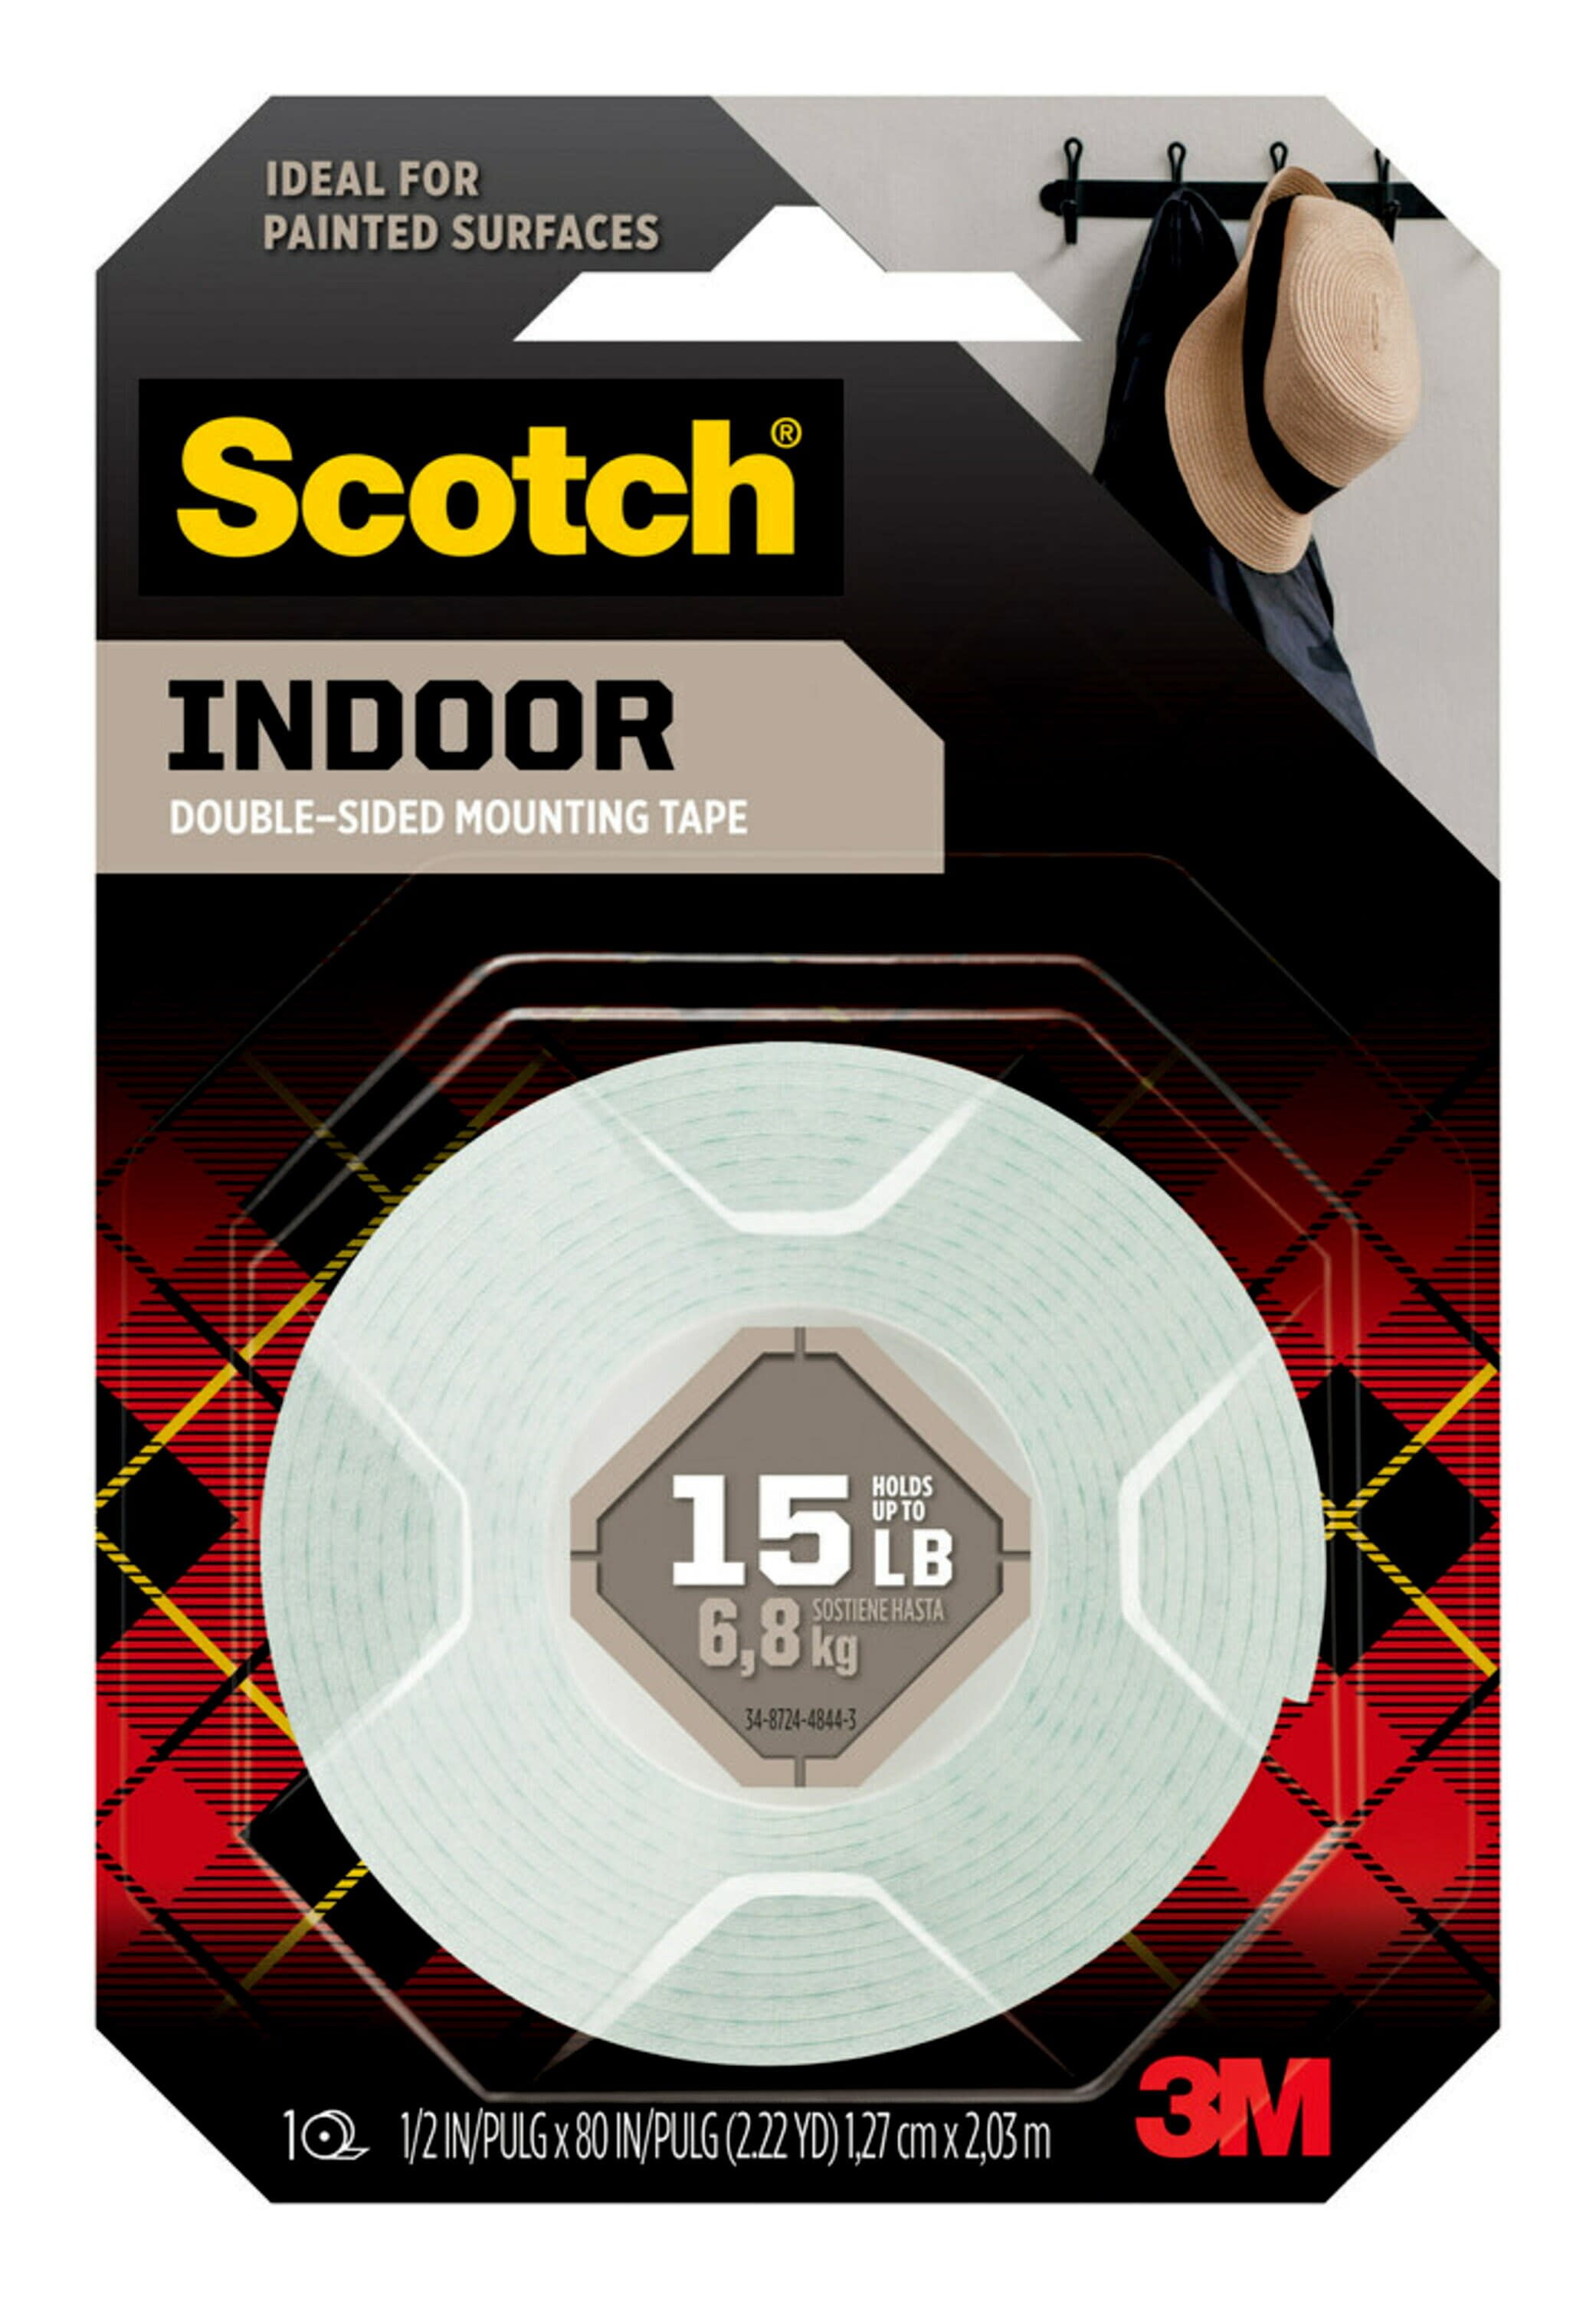 Scotch Indoor Double-Sided Mounting Tape, 1/2 in x 80 in, 1 Roll